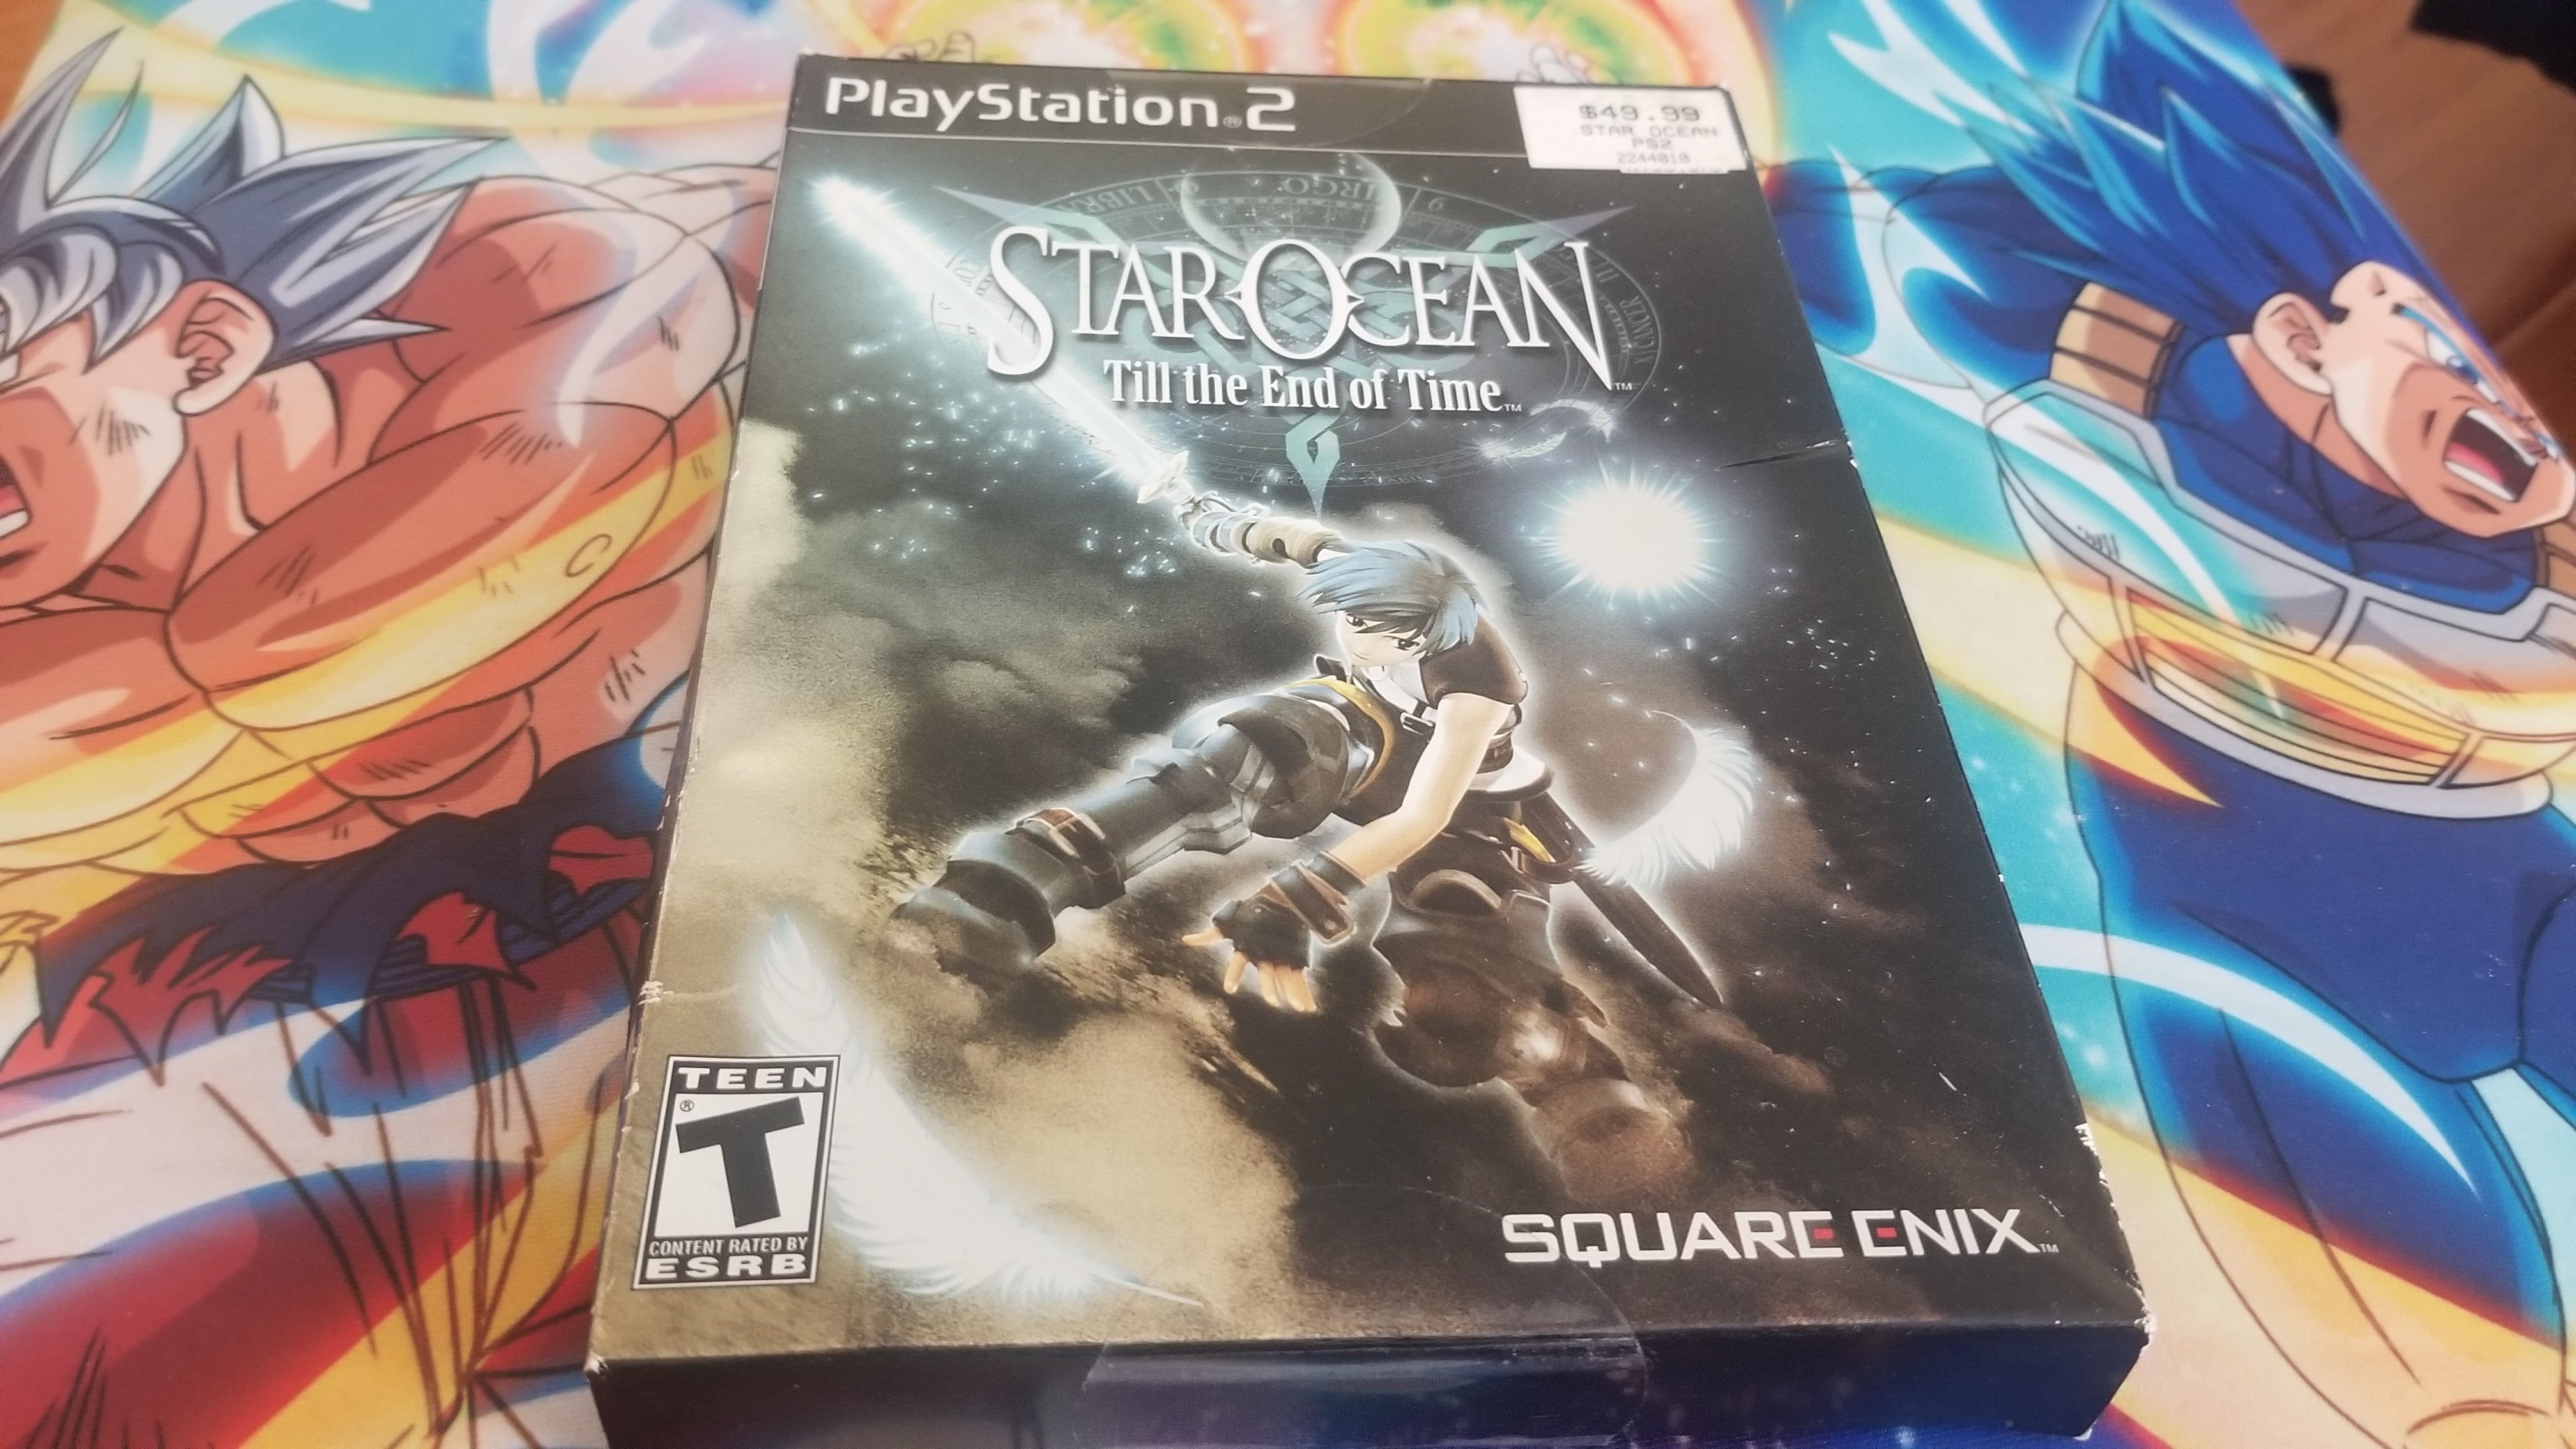 Star ocean till the end of time PS2 game CD starocean - Video Games - South  Shields, Facebook Marketplace